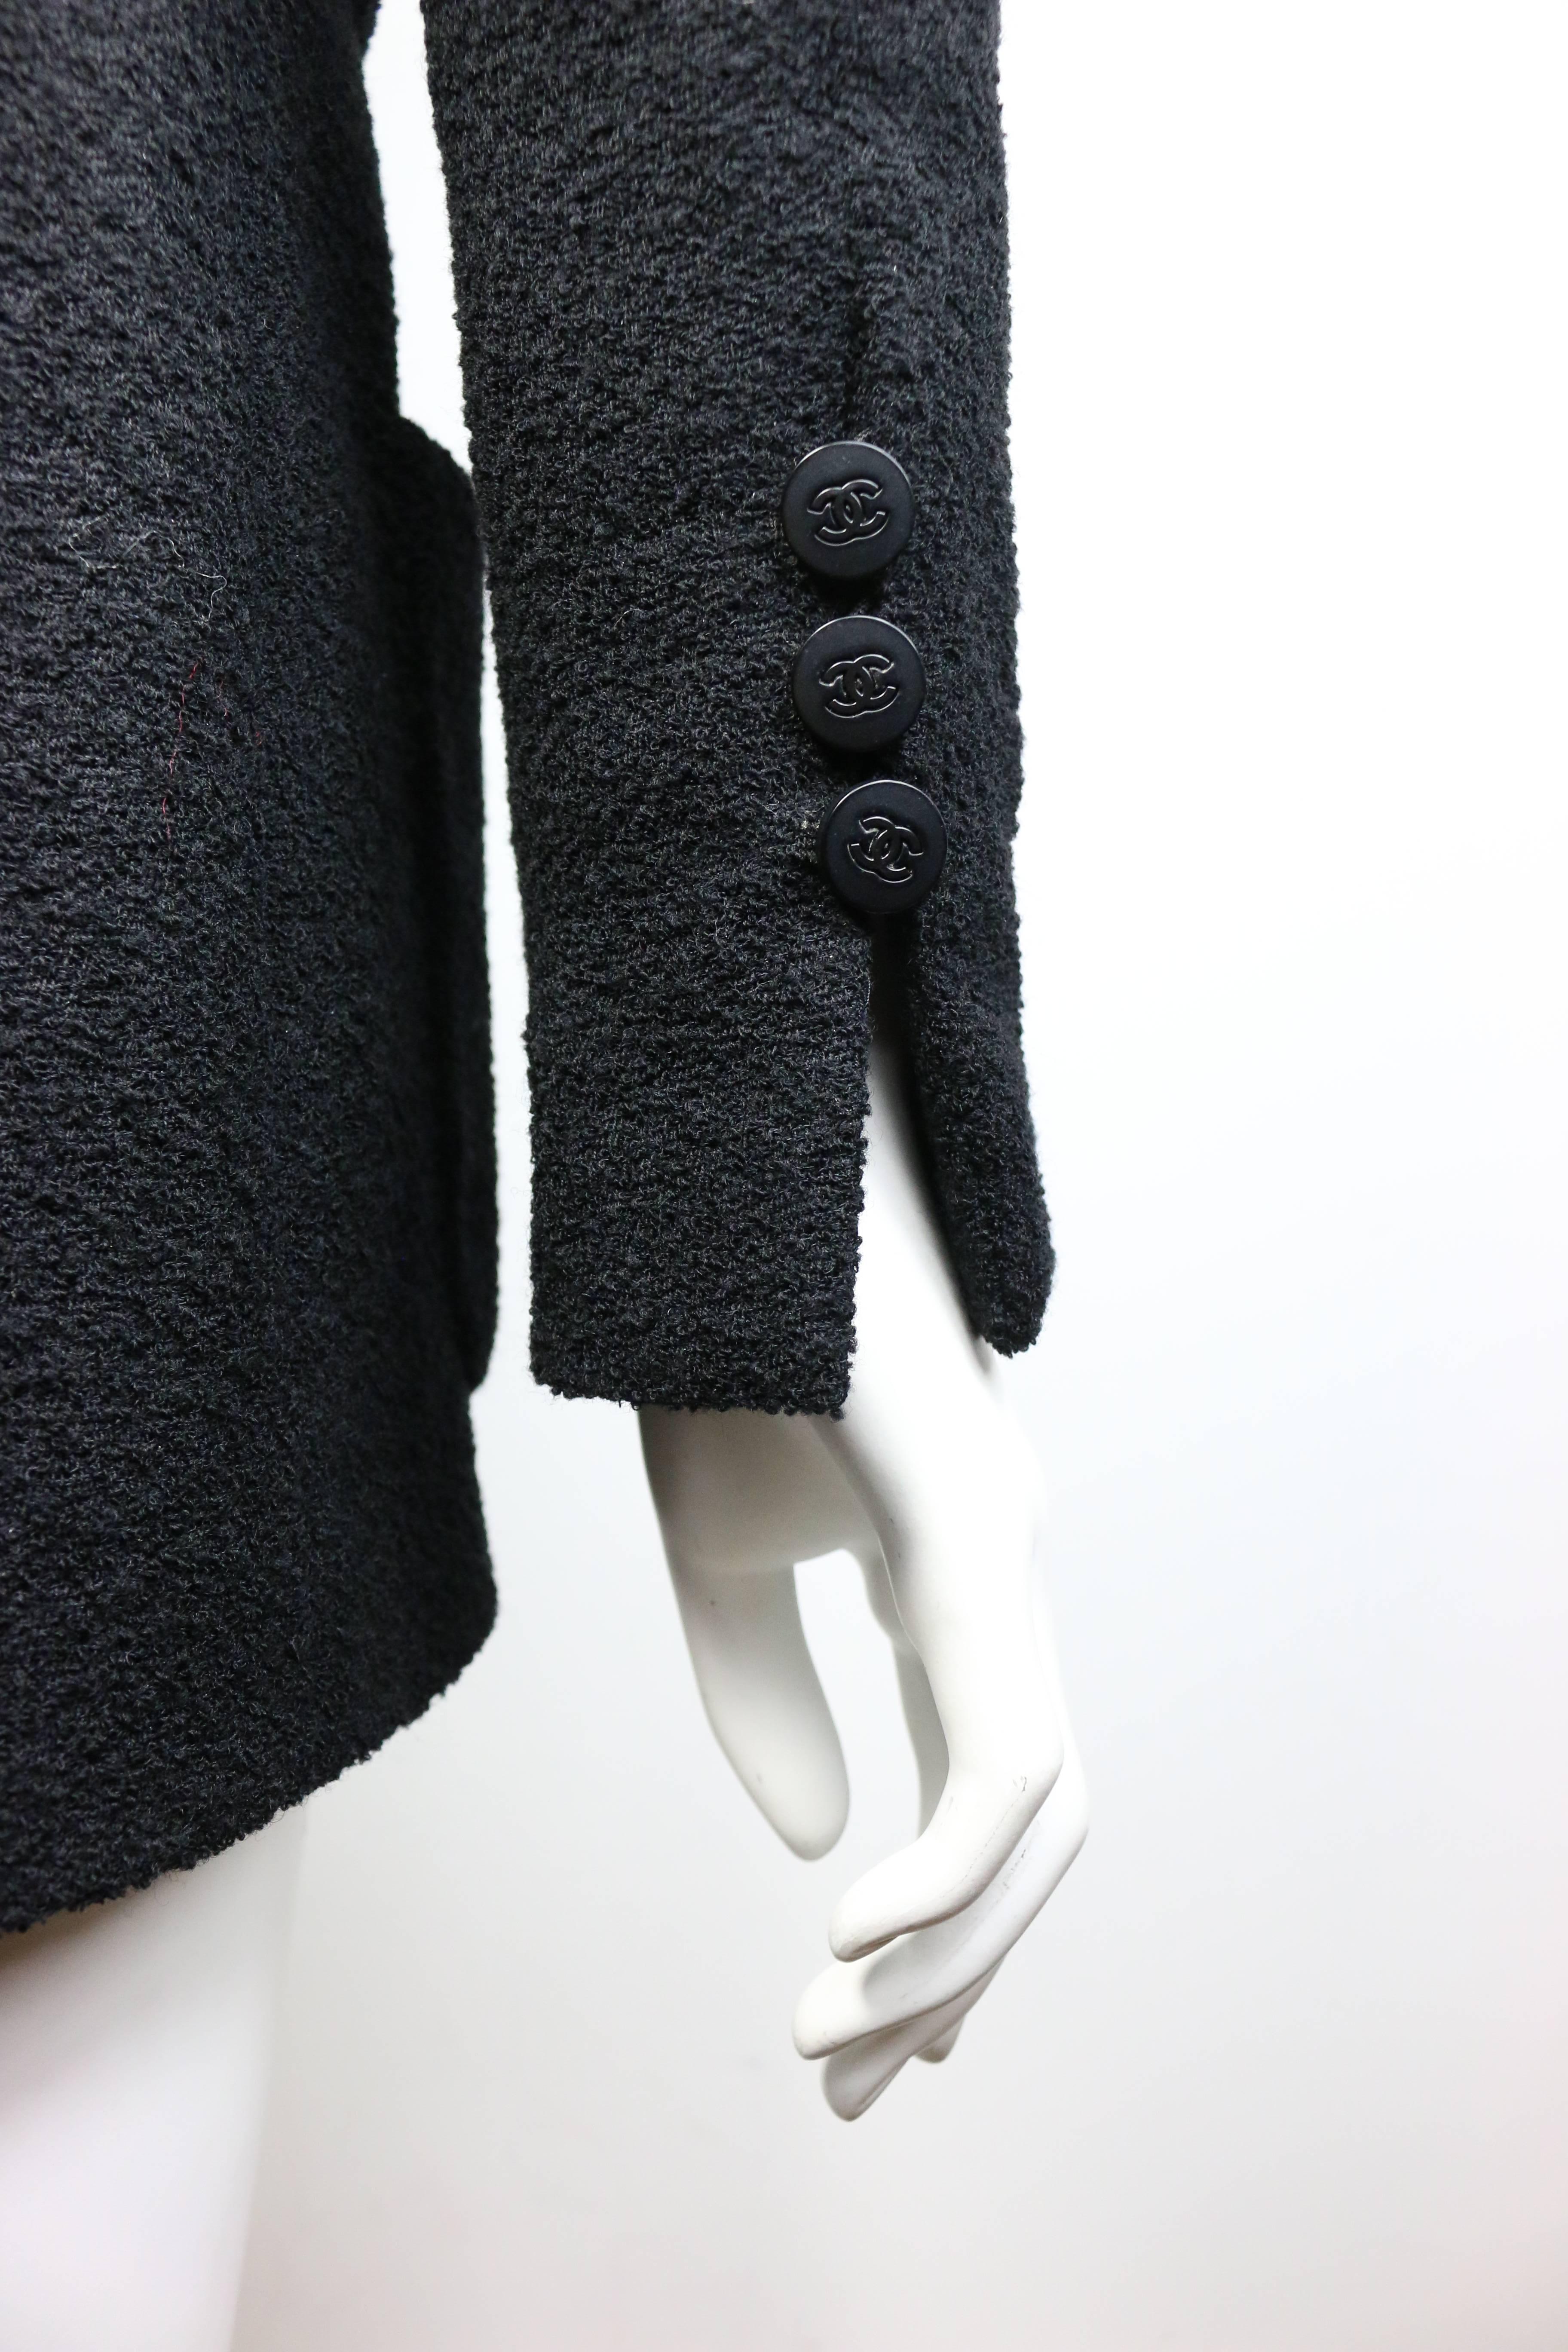 Chanel Black Boucle Wool Jacket with Beige Silk Detectable Collar Vest 1